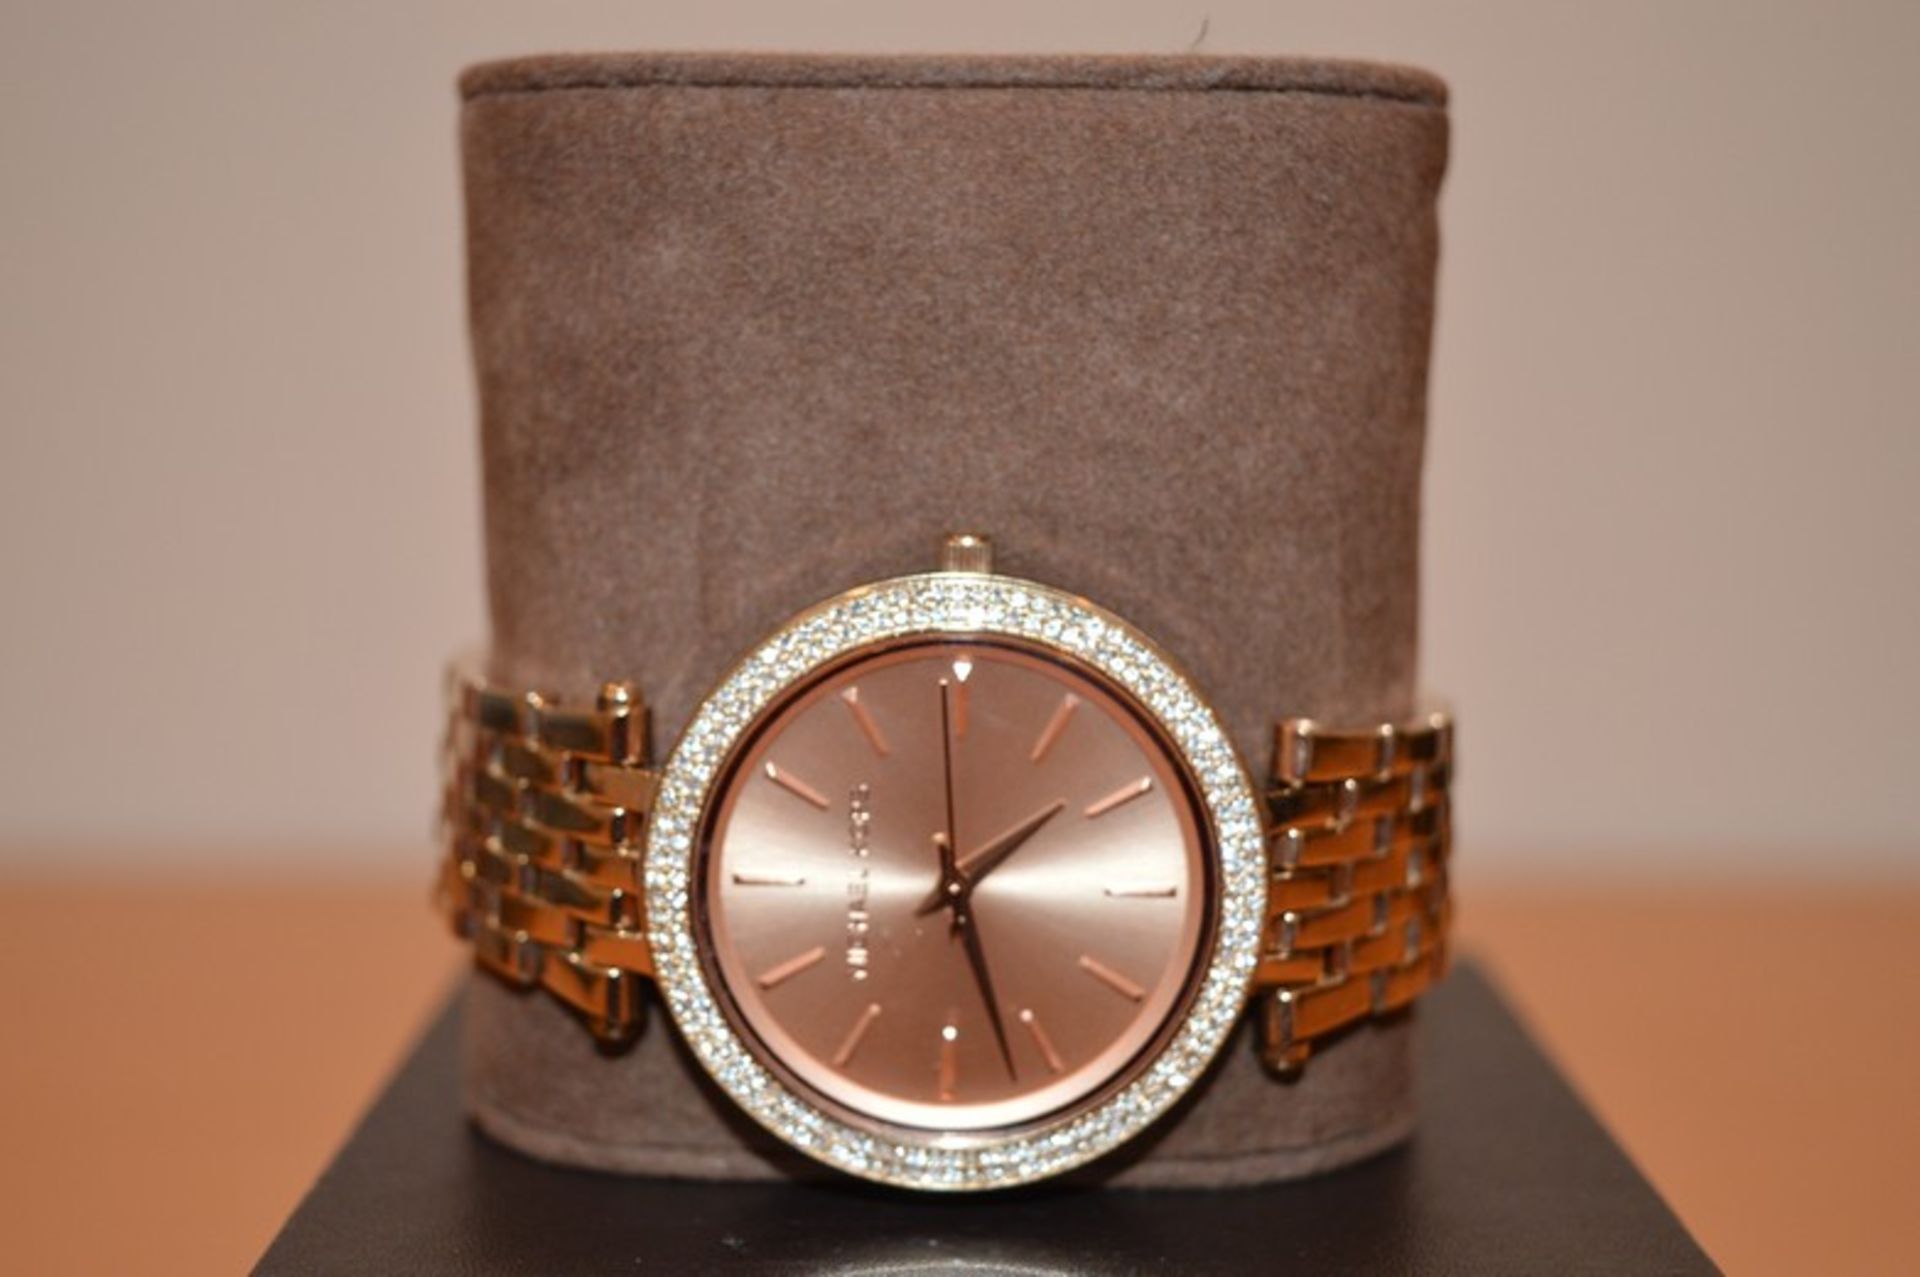 BOXED MICHEAL KORS ROSE GOLD LADIES DESIGNER WRIST WATCH RRP £269.99 (MD-WATCH)